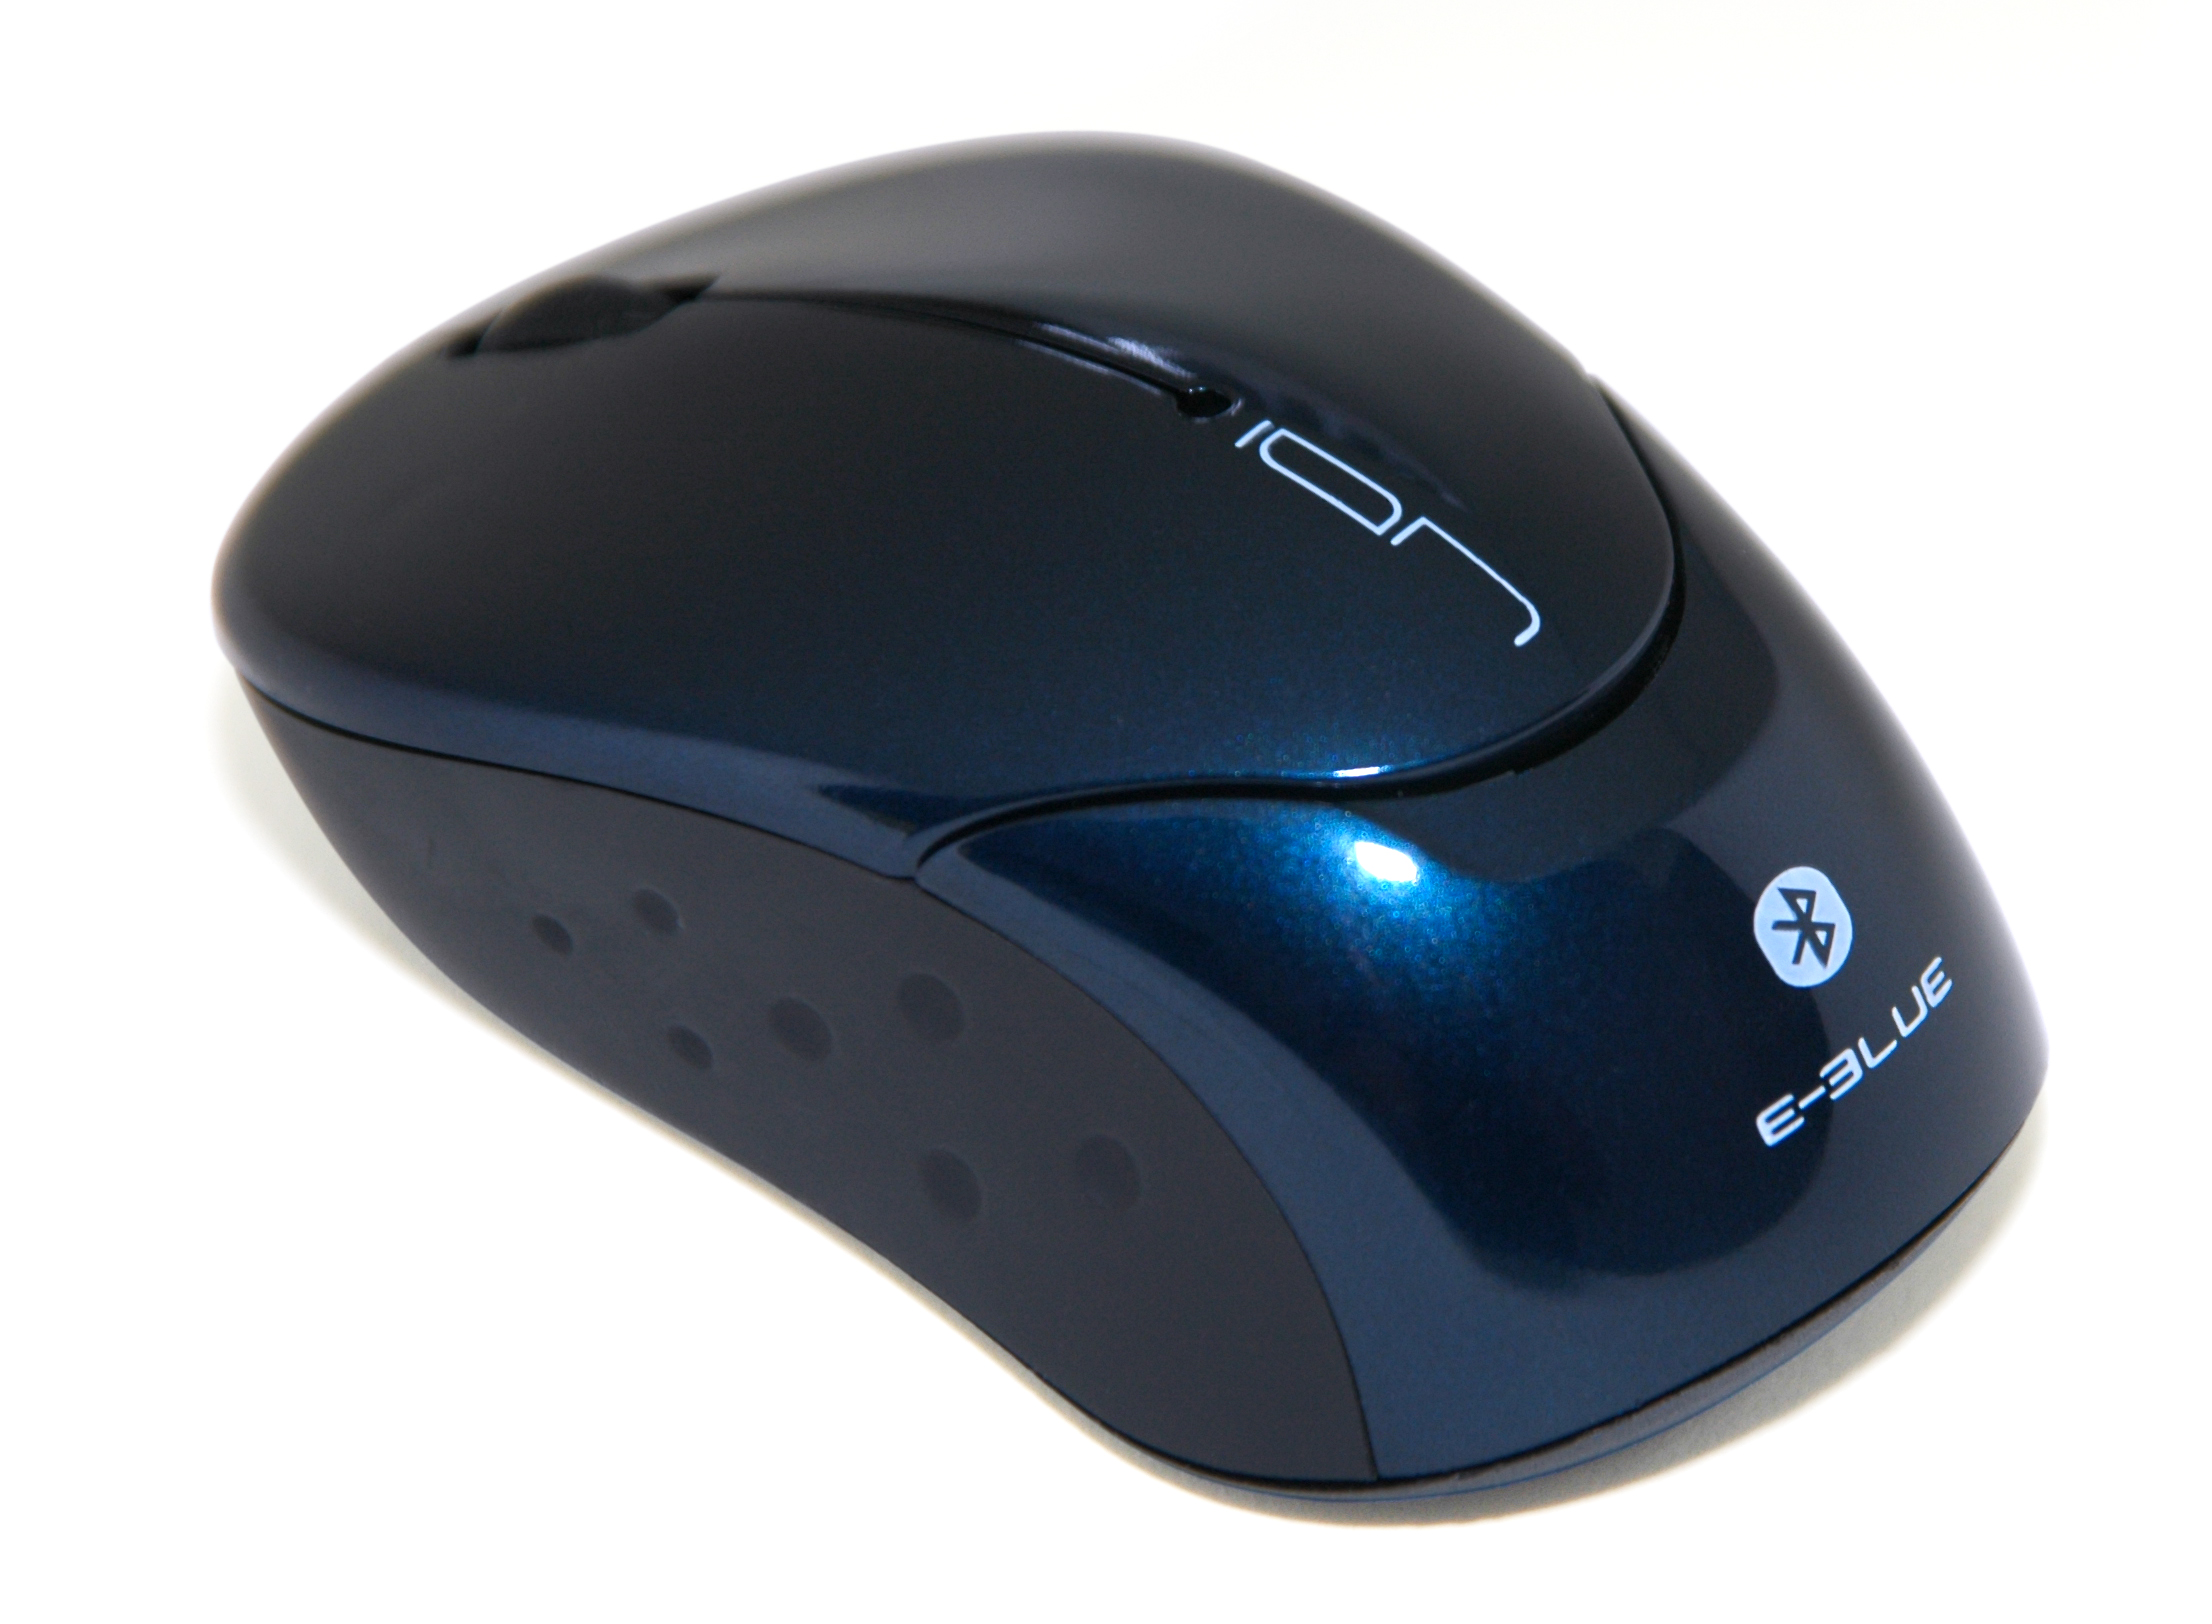 ION Bluetooth wireless mouse